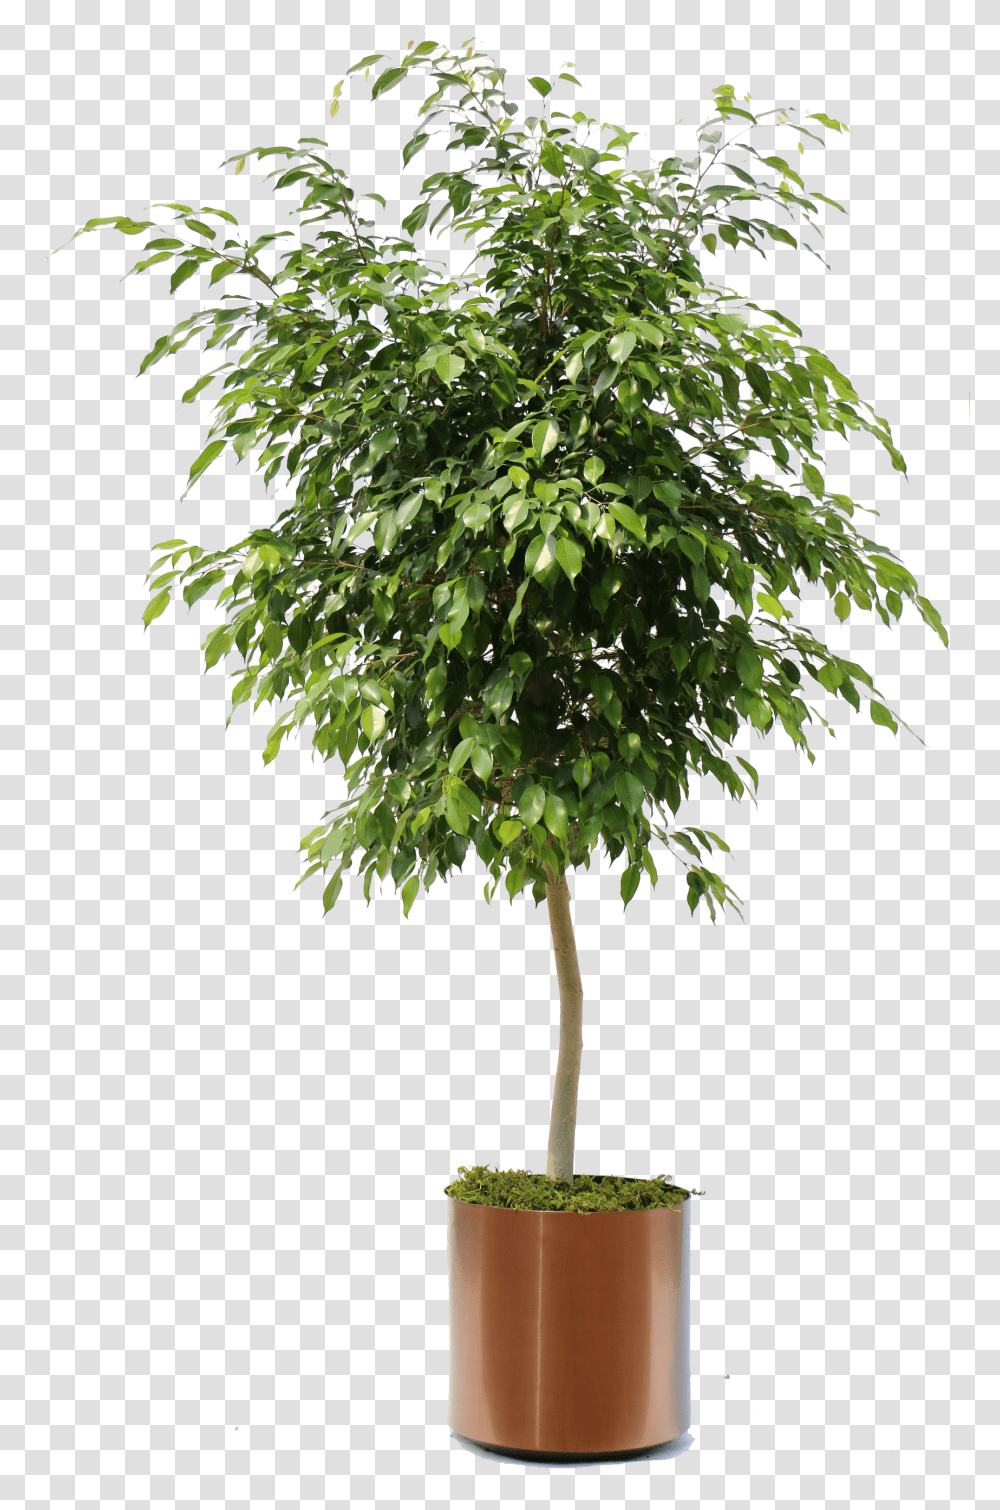 Download Hd Overview Of The Many Plants We Can Bring To Your Weeping Fig Ficus Benjamina, Tree, Maple, Potted Plant, Vase Transparent Png